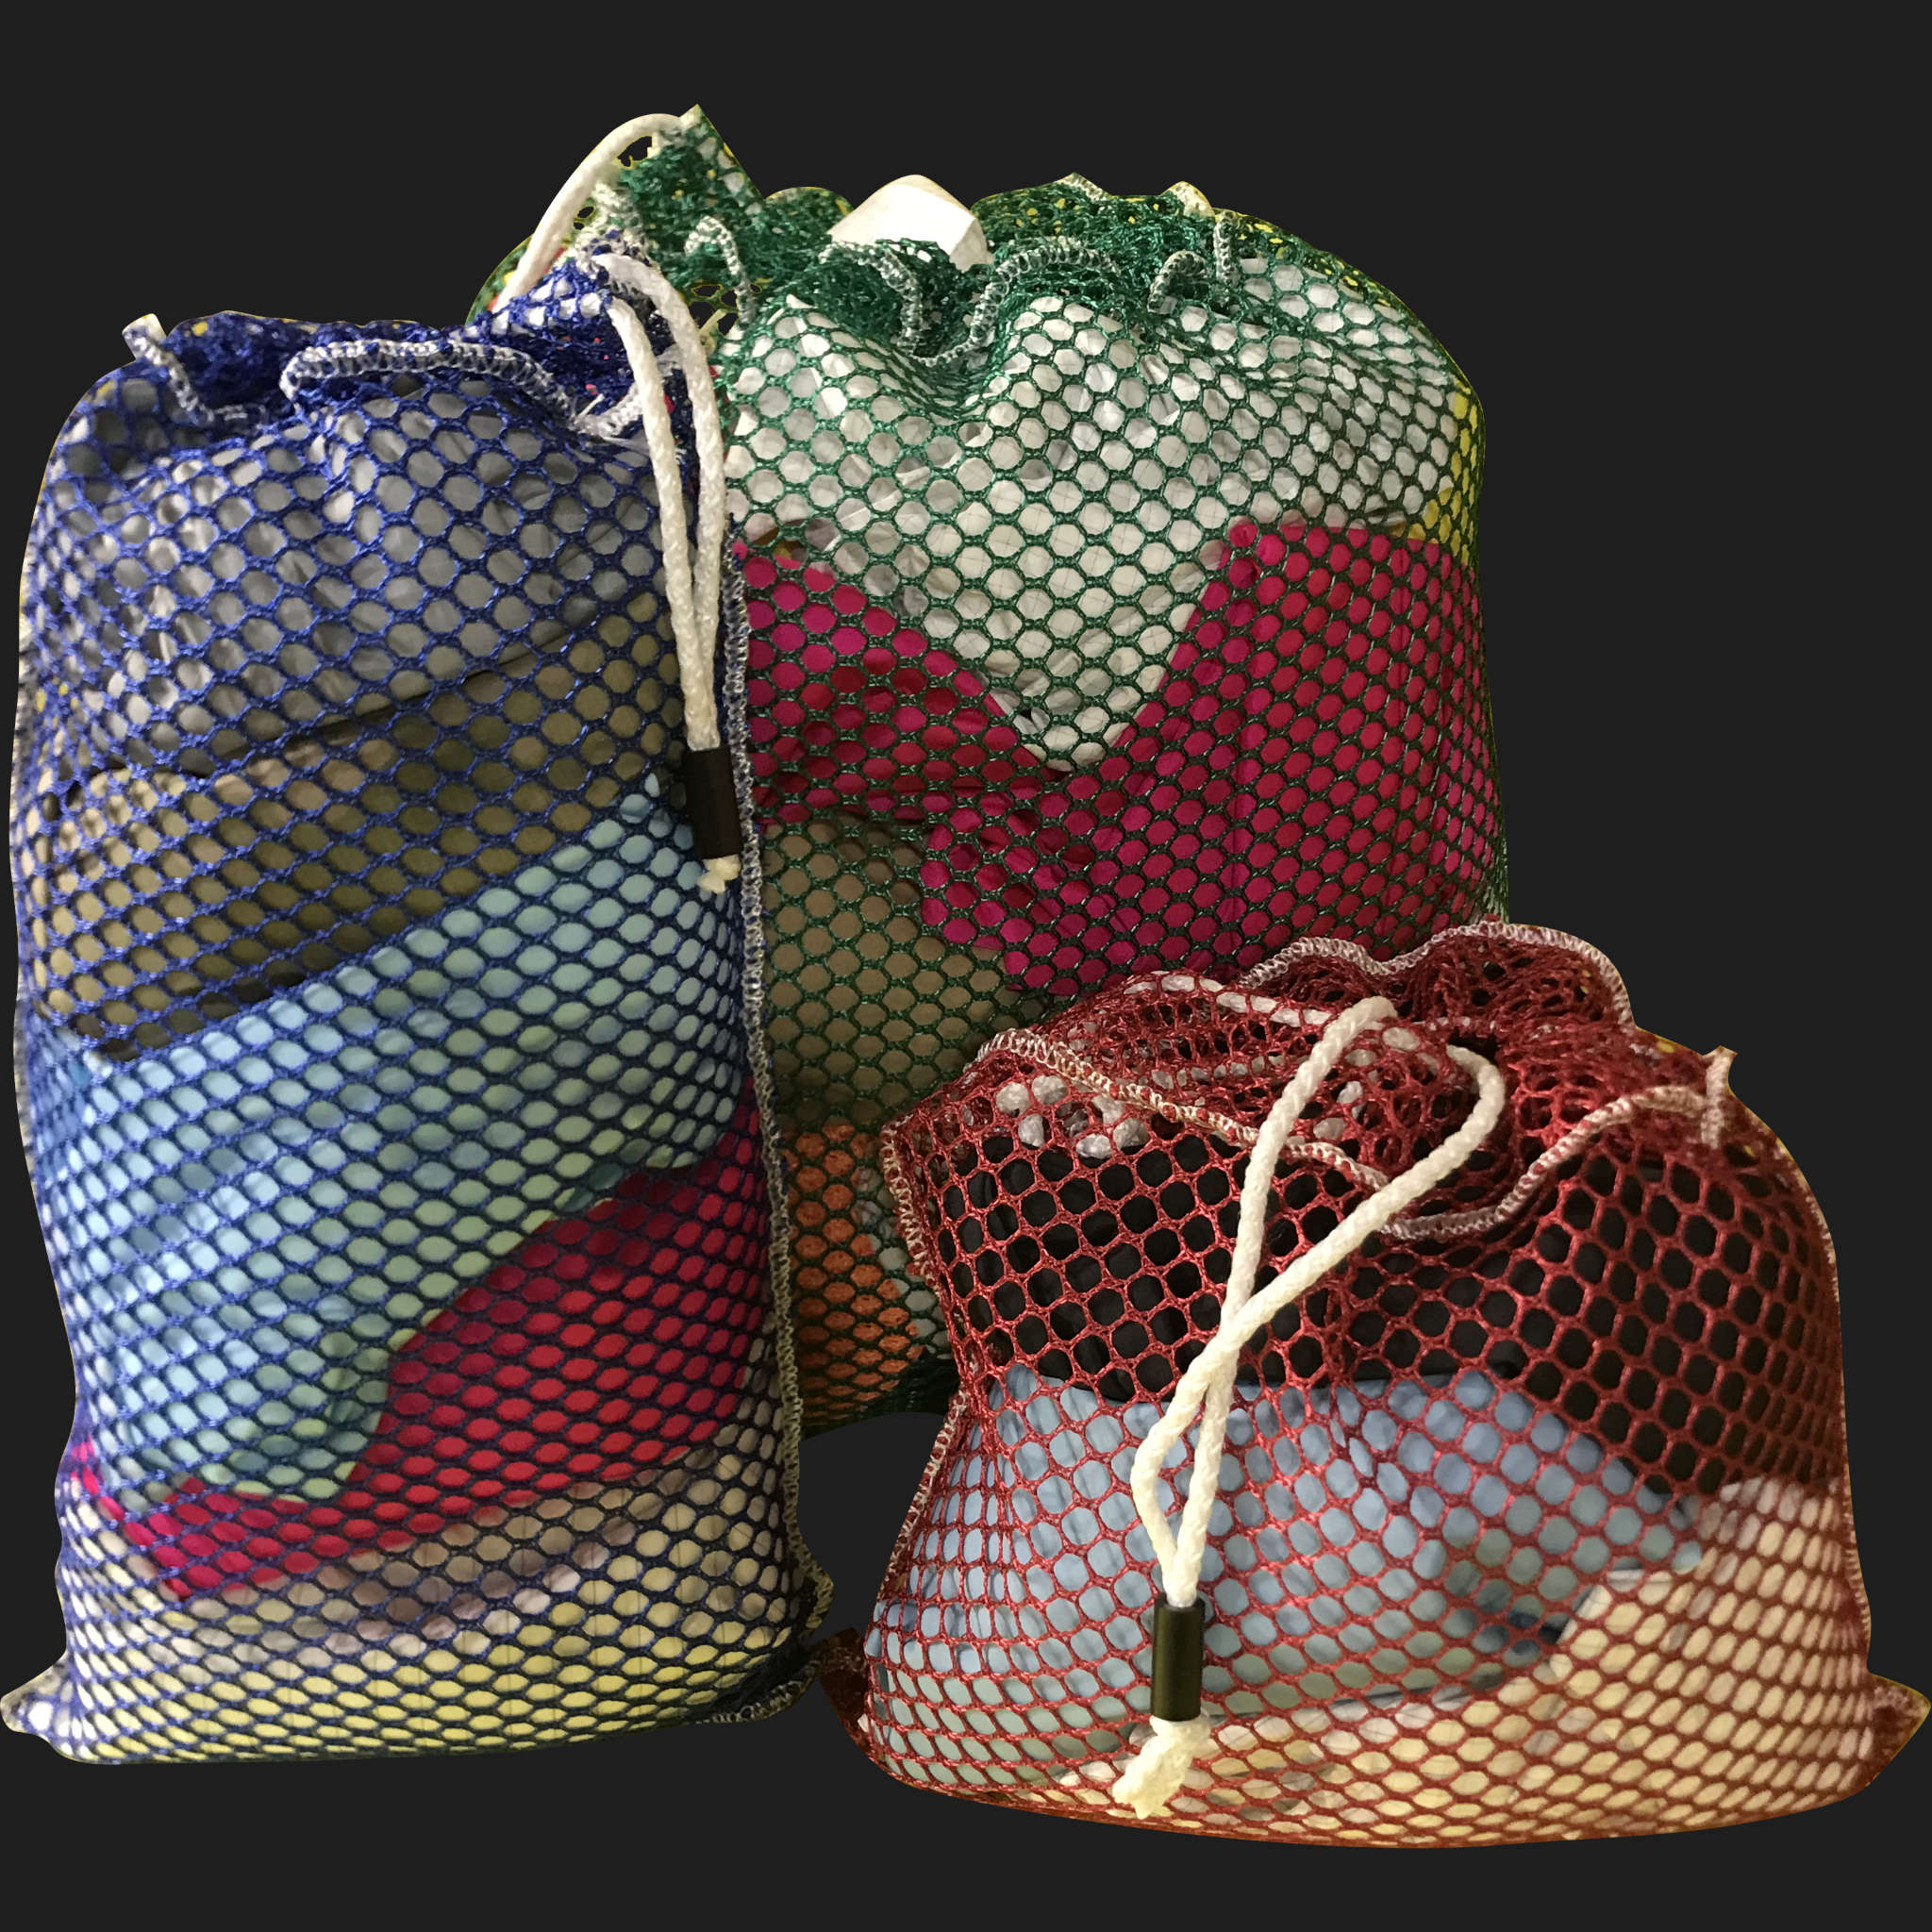 16" x 28" Customized Mesh-Net-Laundry Bags Heavy Duty with Cord and barrellock closure